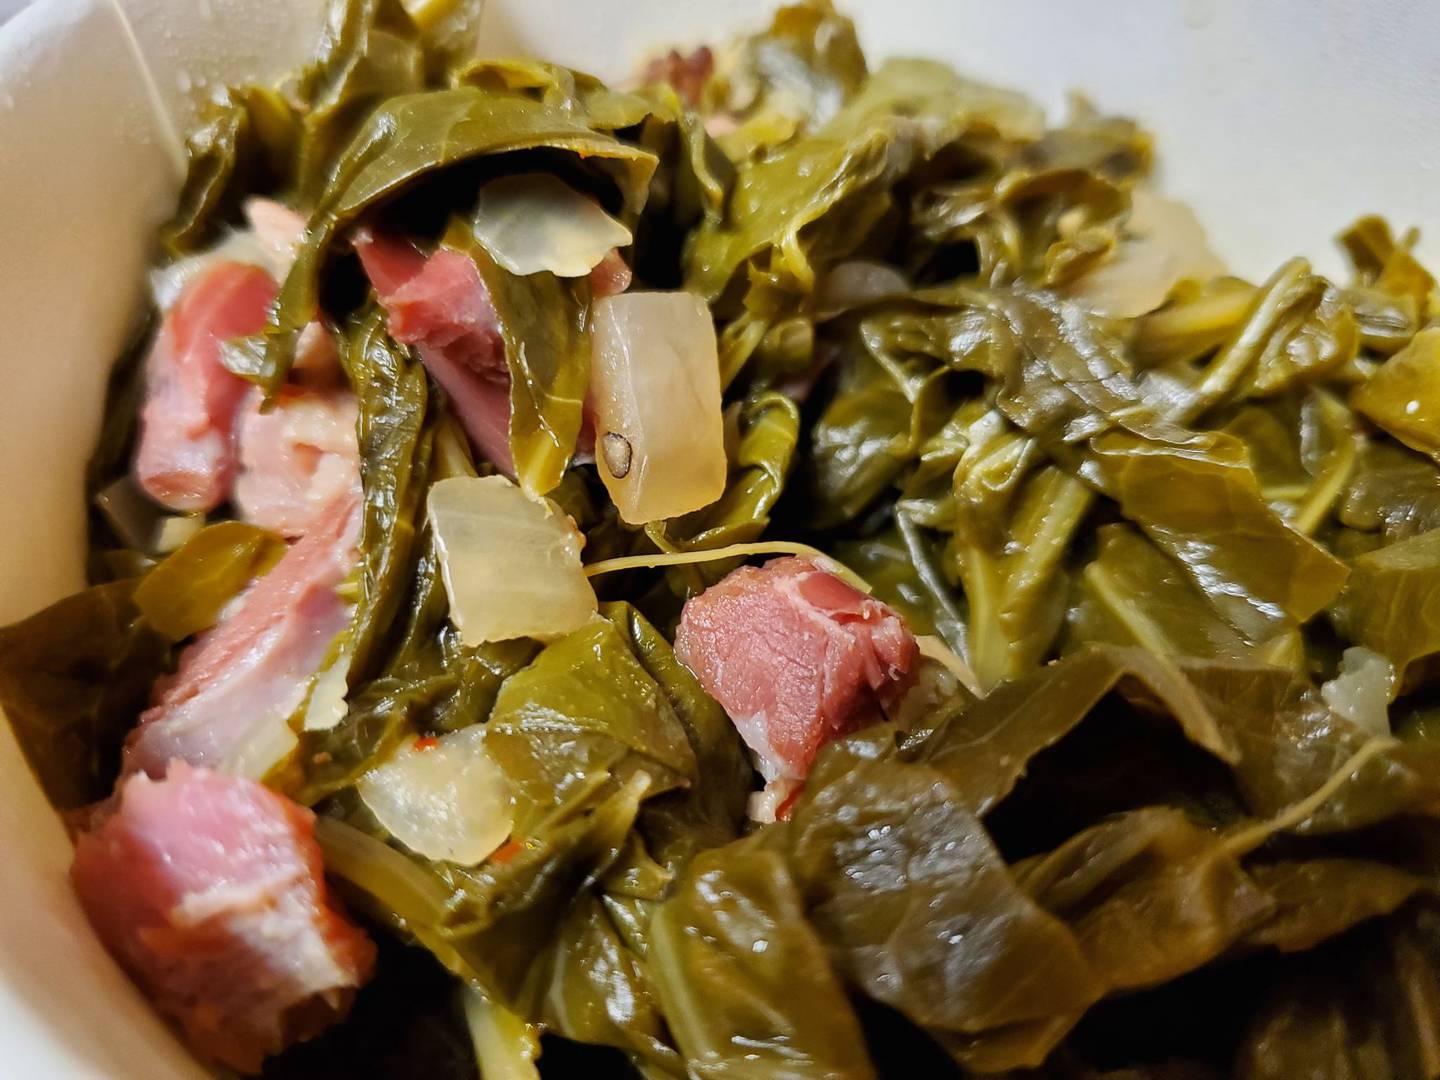 Station One Smokehouse in Plainfield prepares its spicy collard greens with bits of meat and onions.